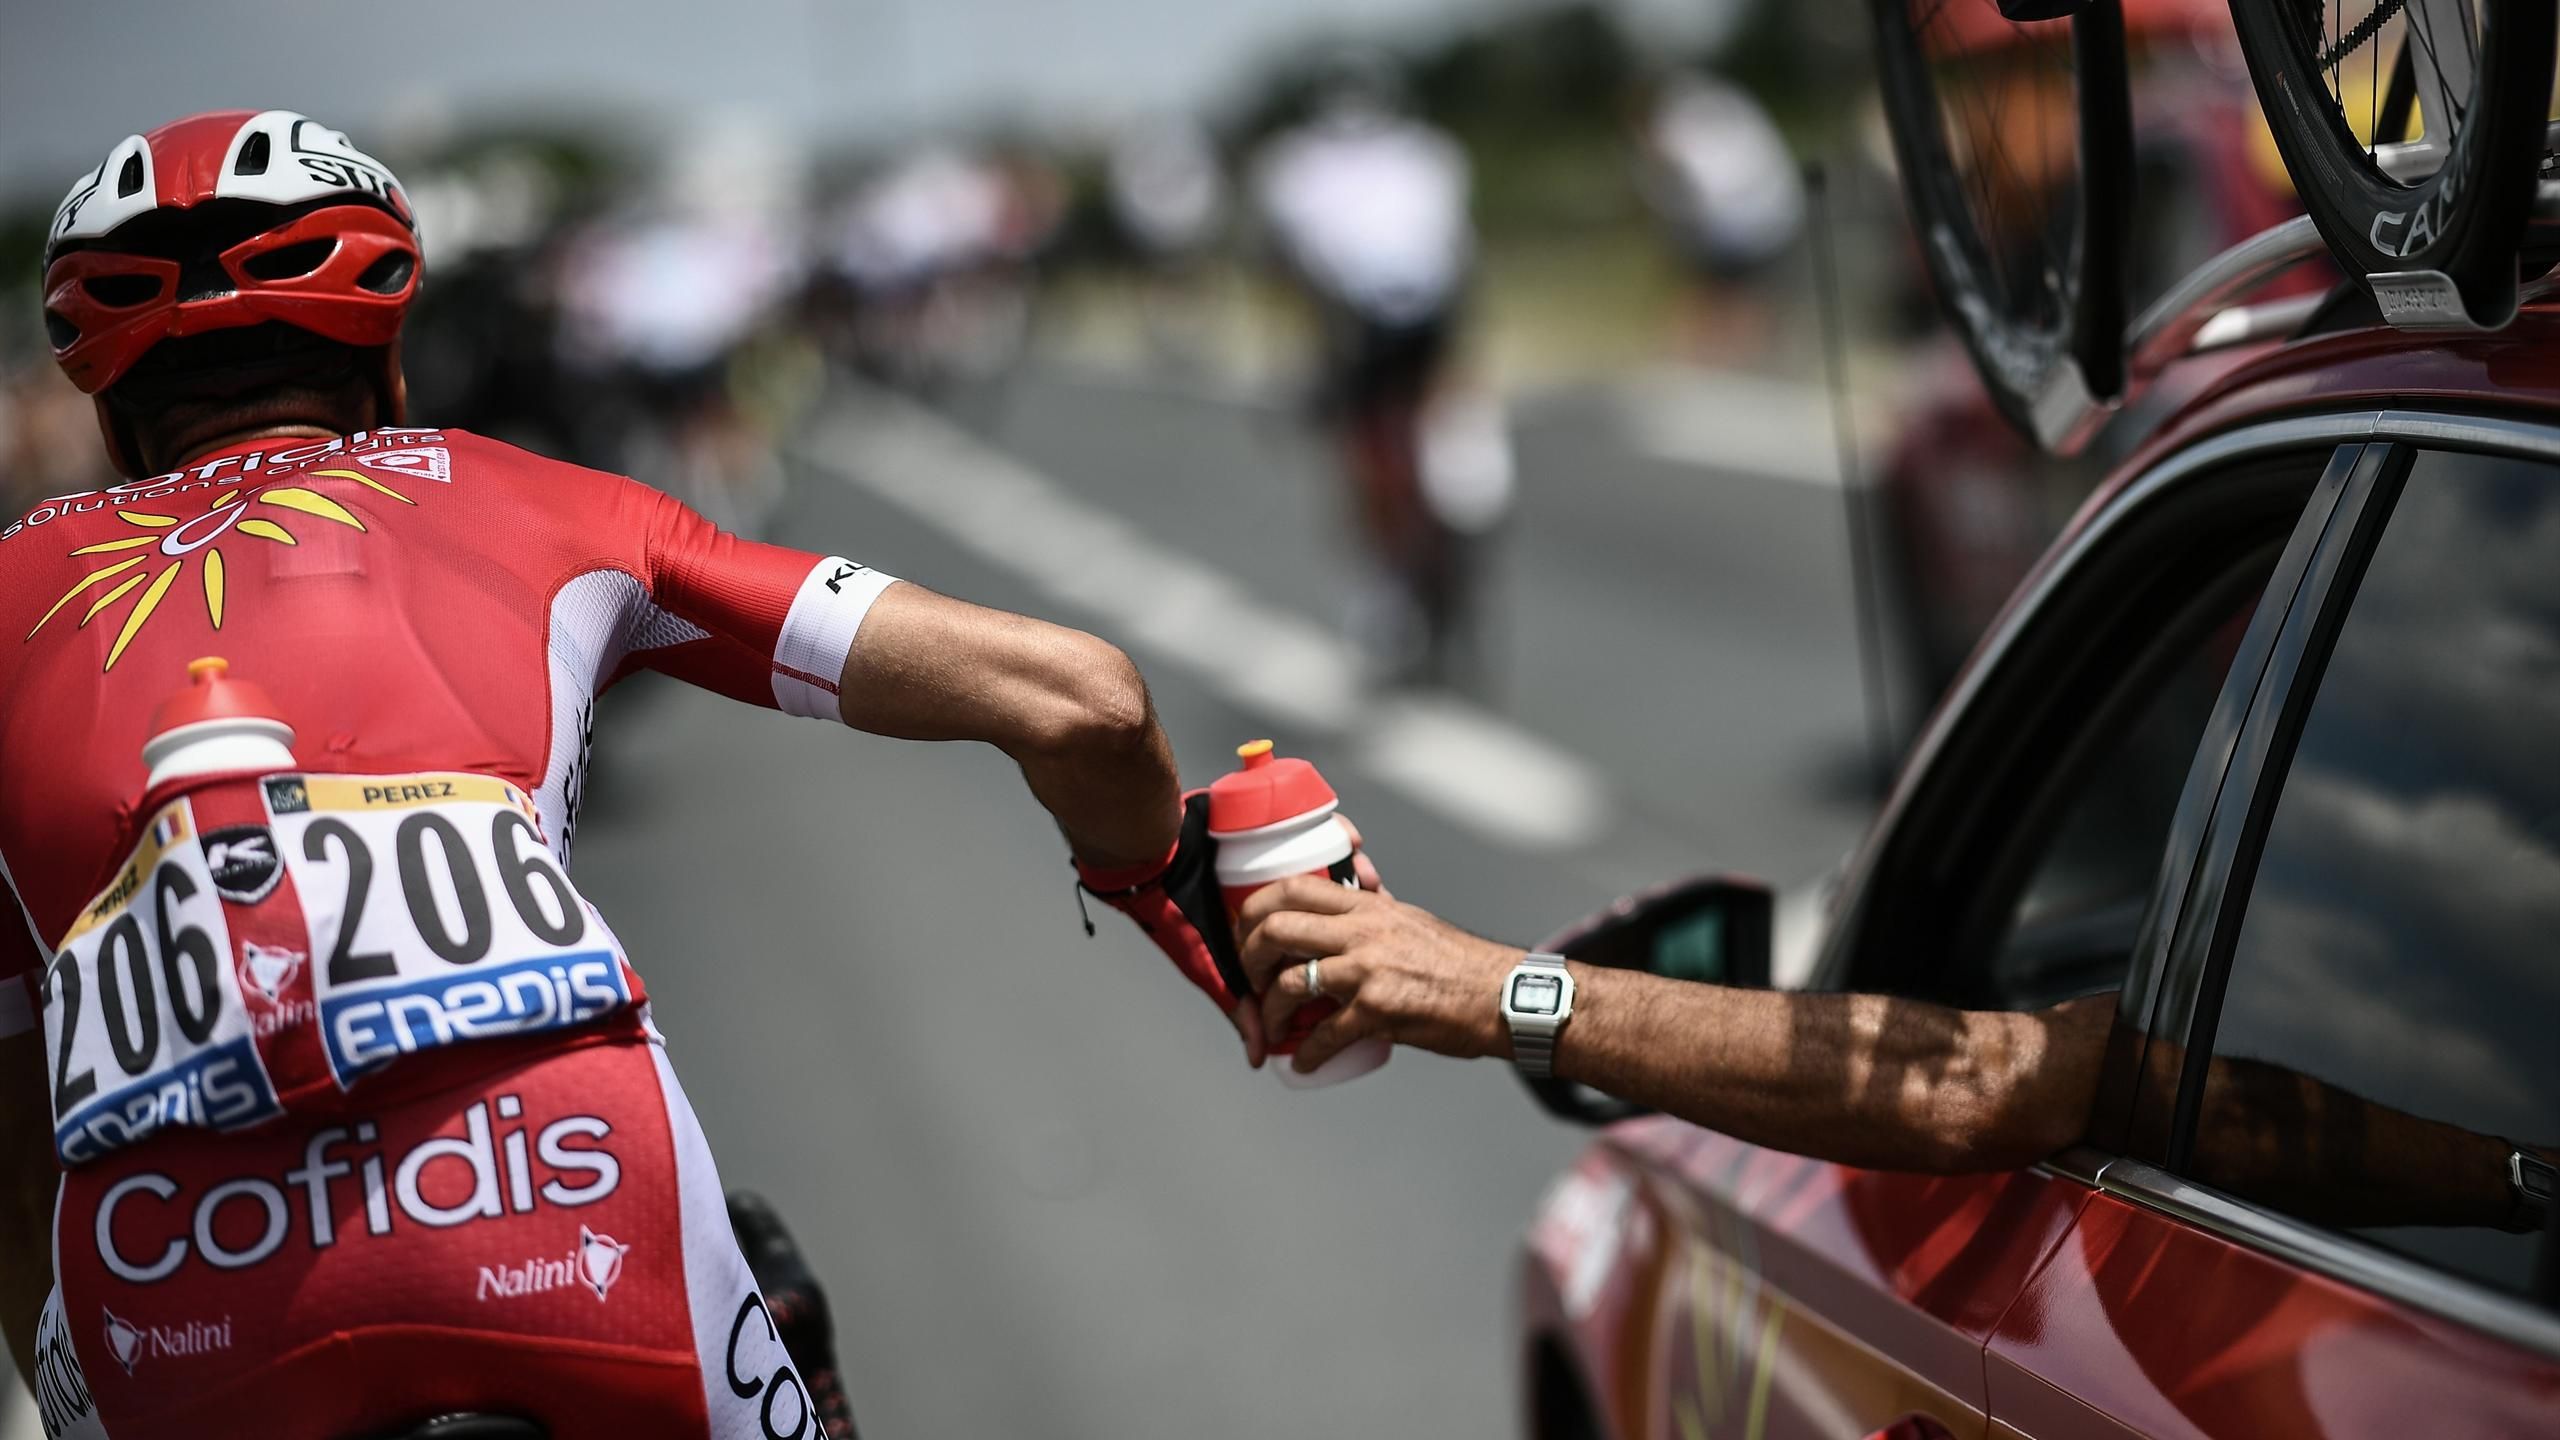 755 bidons per rider per year: How to solve cycling's water bottle